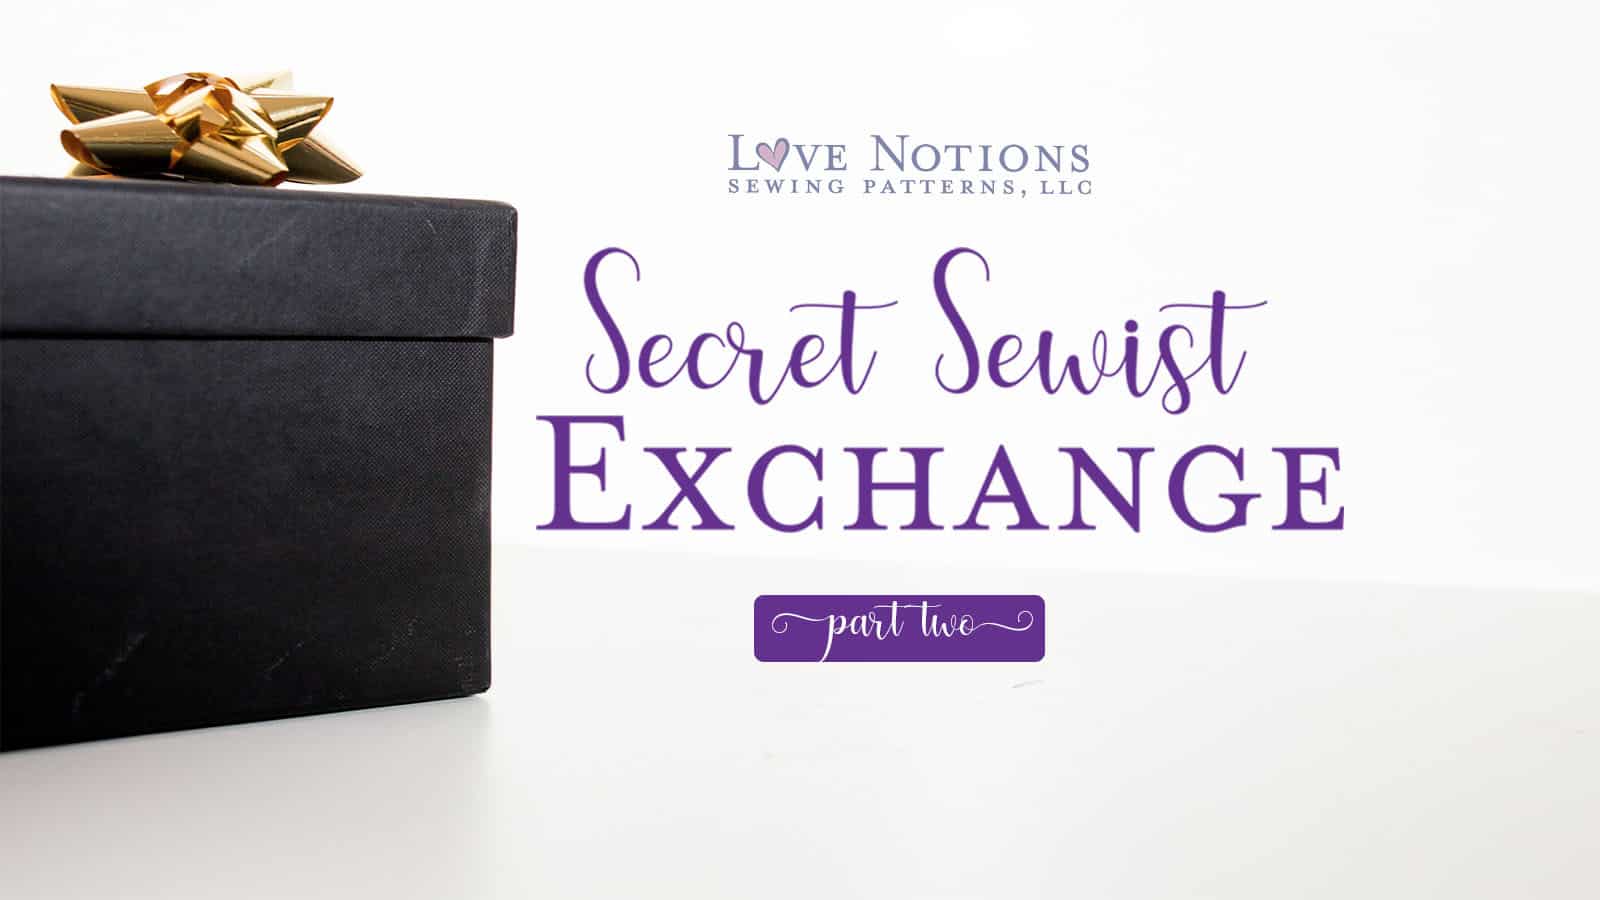 Secret Sewist and Sewing Gift Guide, Part Two